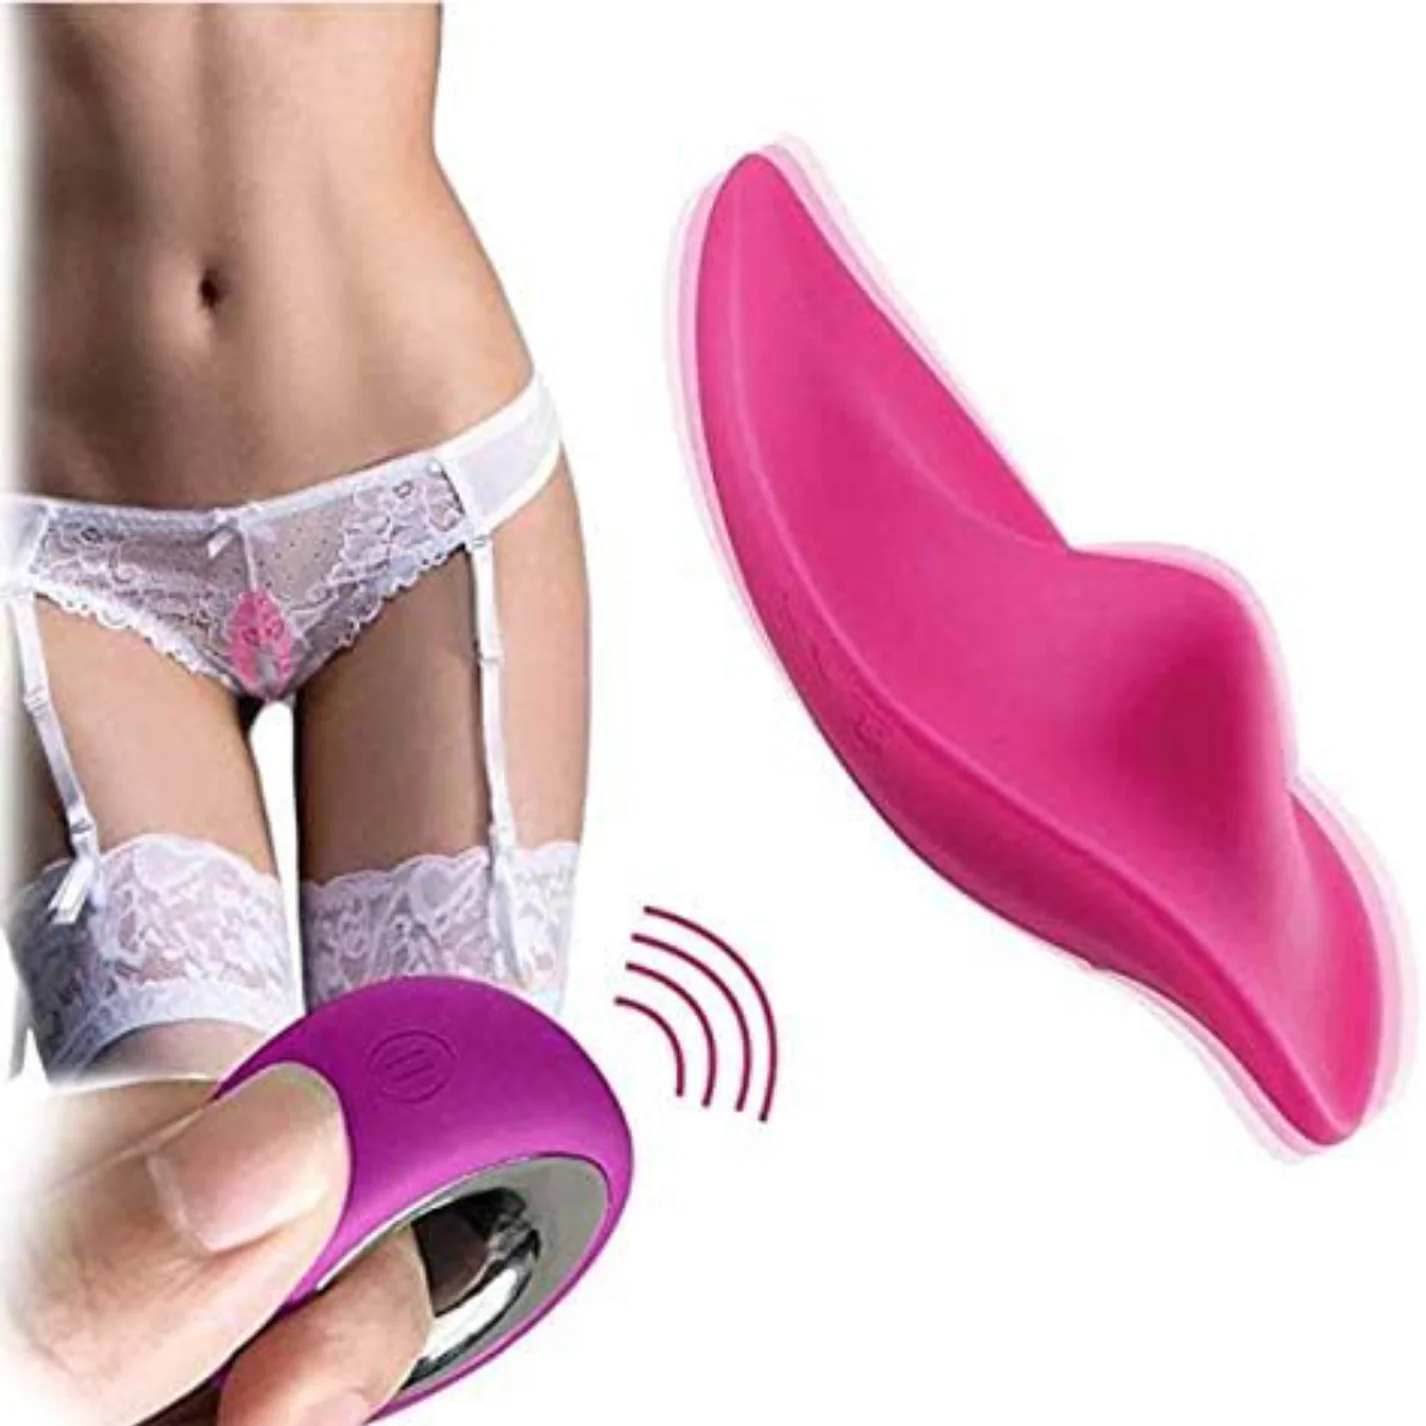 Wearable Panty Vibrators Adult Sex Toys for Women or Couples, Remote Control Clit Mini Vibrator with 12 Vibrating Modes Vibrating Panties Quite Rose Dildos Sex Machine